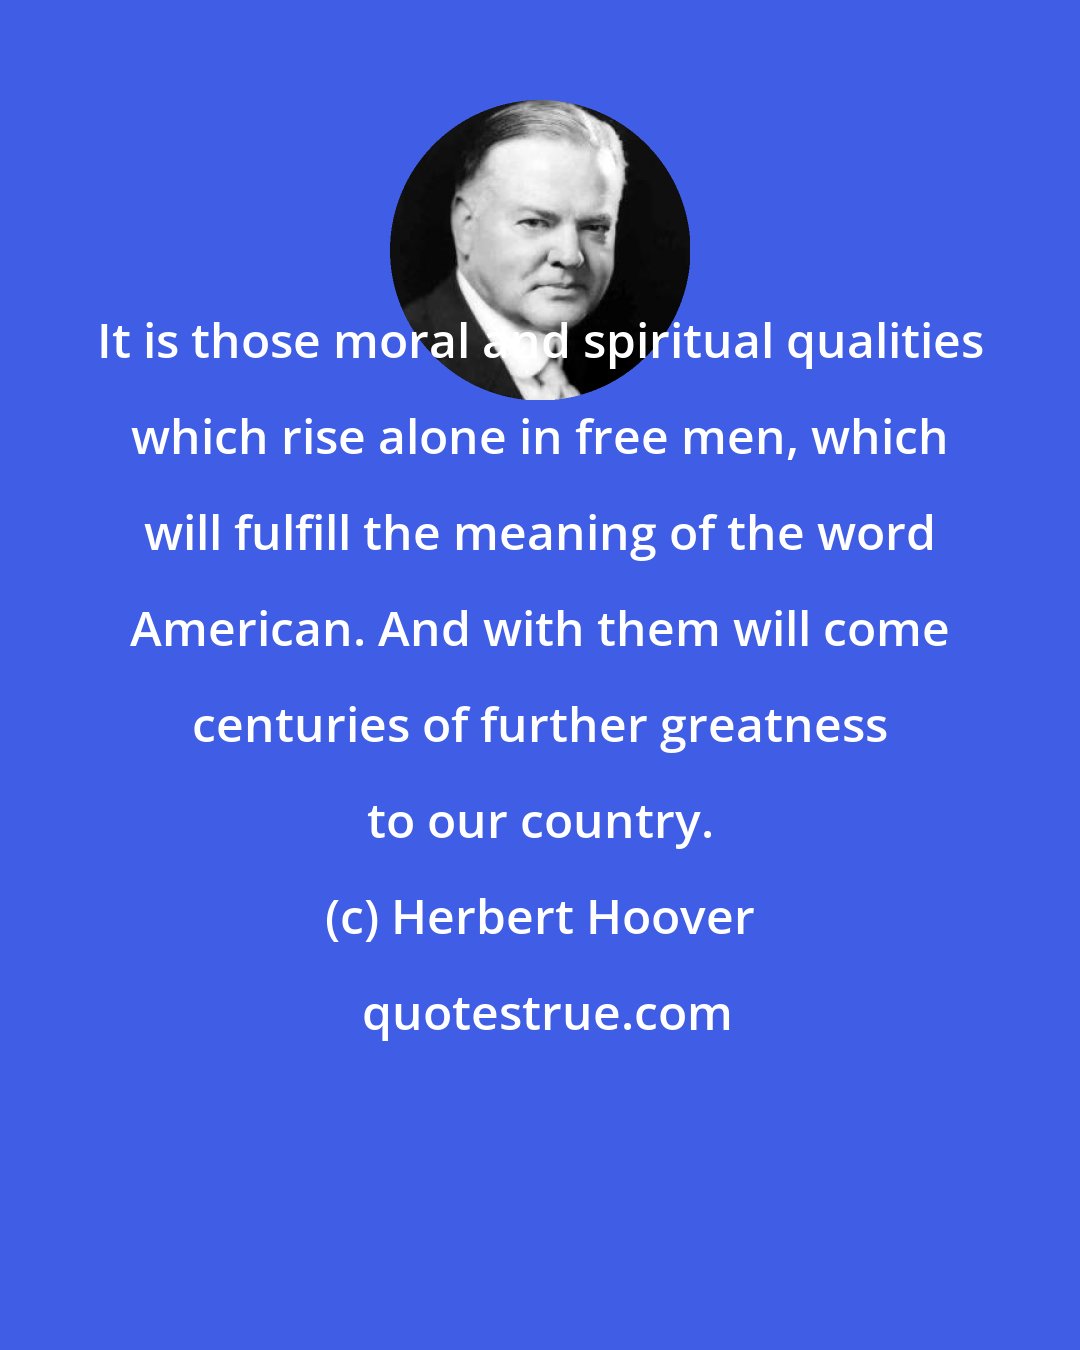 Herbert Hoover: It is those moral and spiritual qualities which rise alone in free men, which will fulfill the meaning of the word American. And with them will come centuries of further greatness to our country.